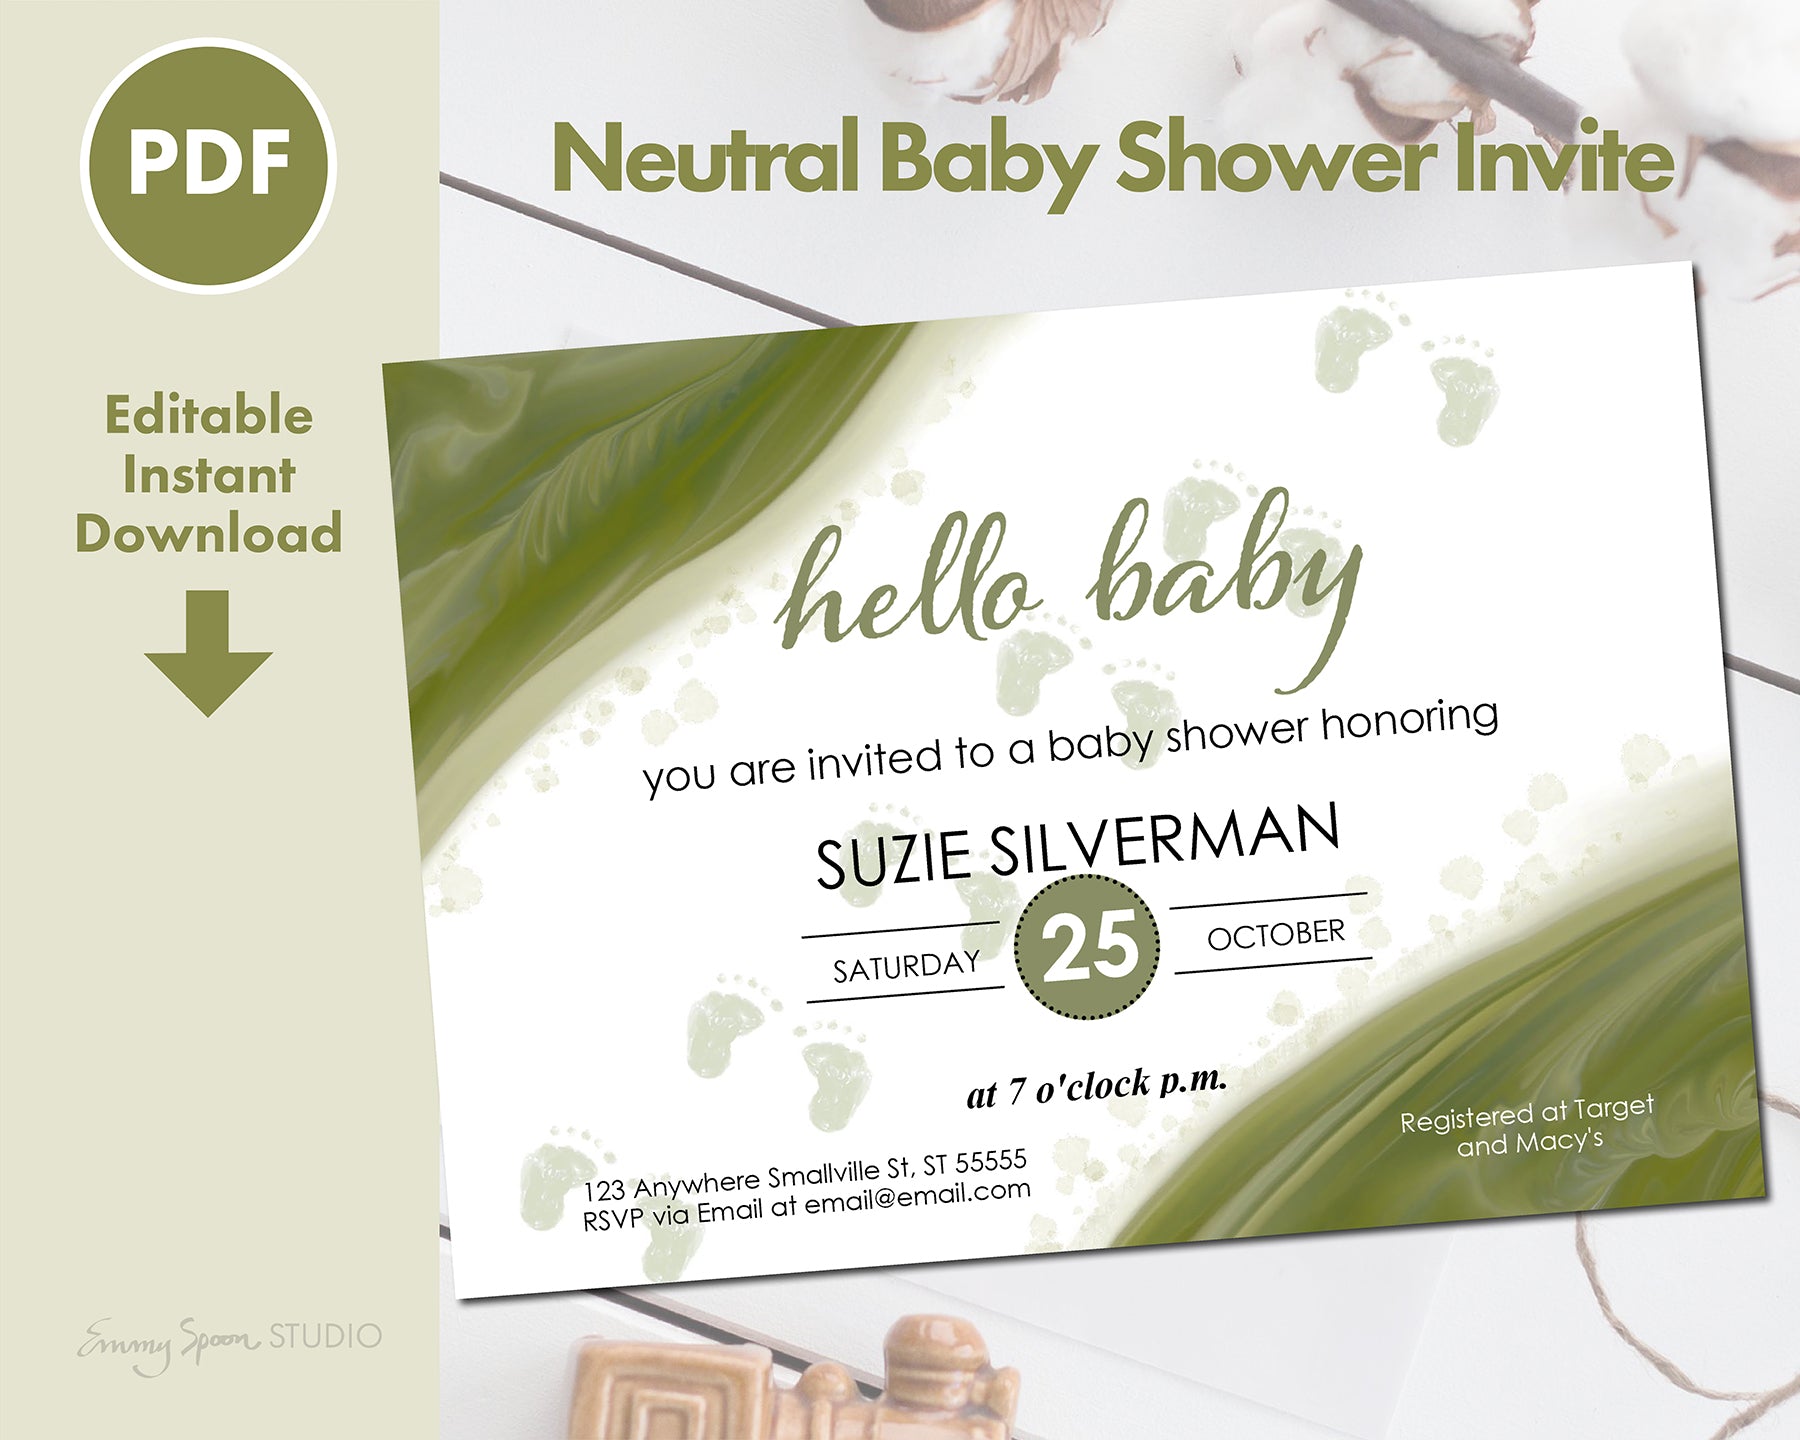 Neutral Baby Shower Invite - Editable PDF Instant Download.